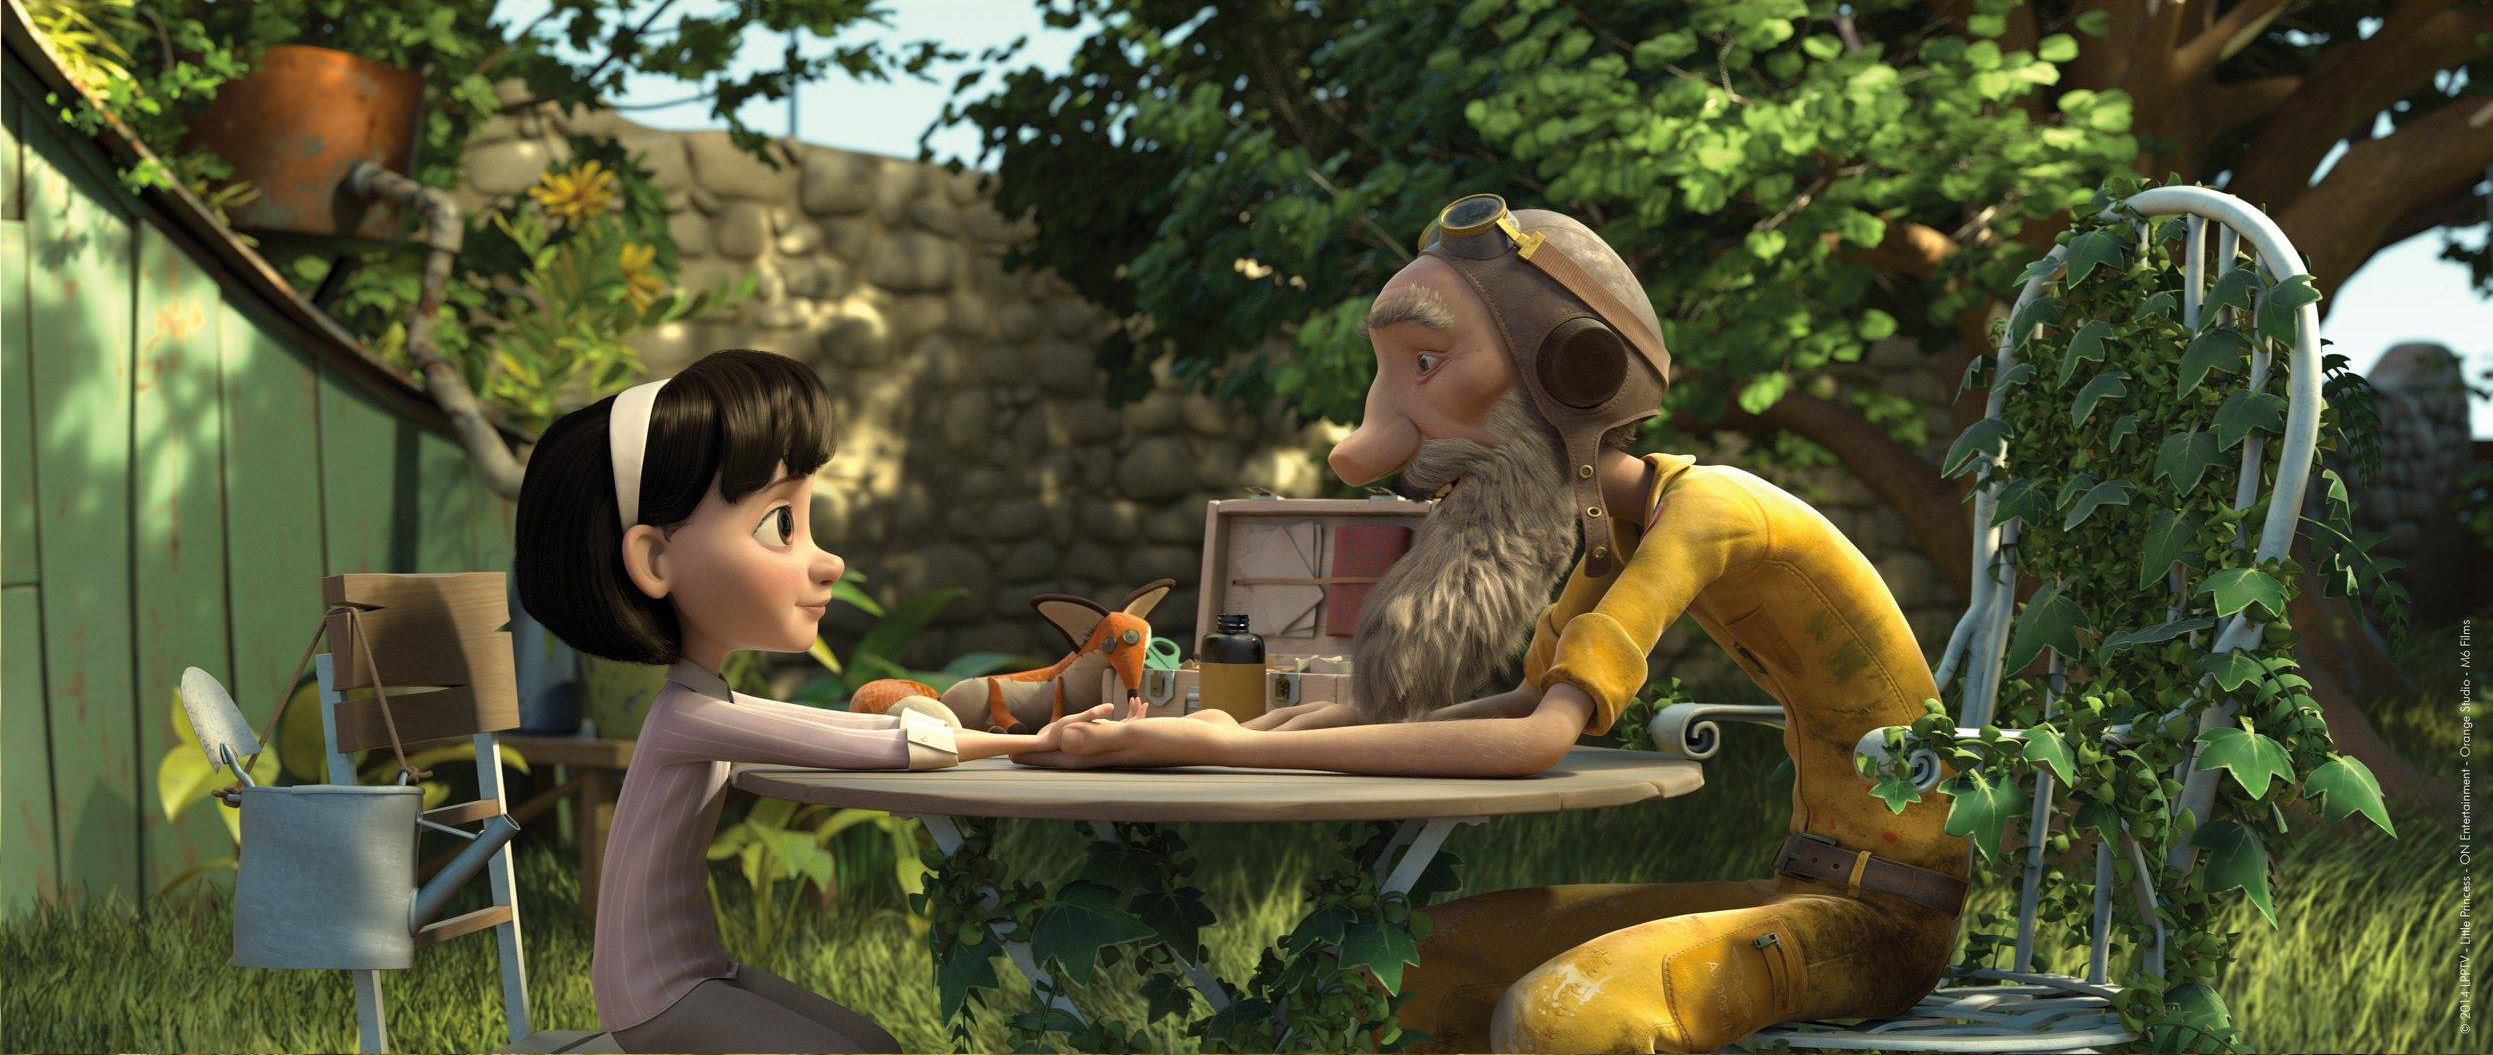 First trailer for Le petit prince